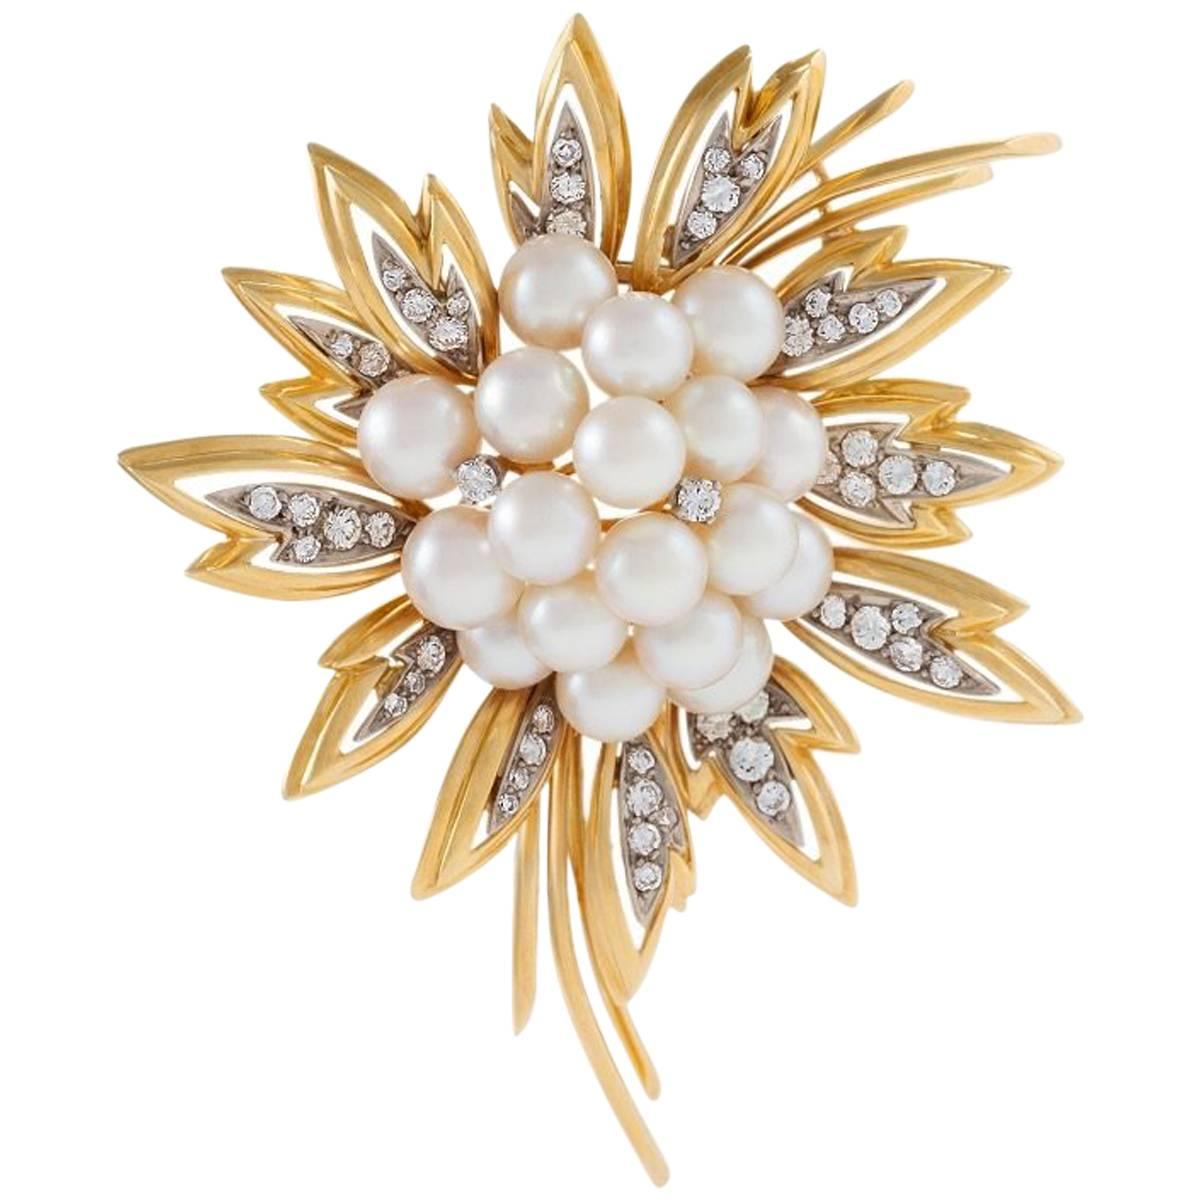 Tiffany & Co. Diamond Pearl Platinum and Gold Flower Brooch